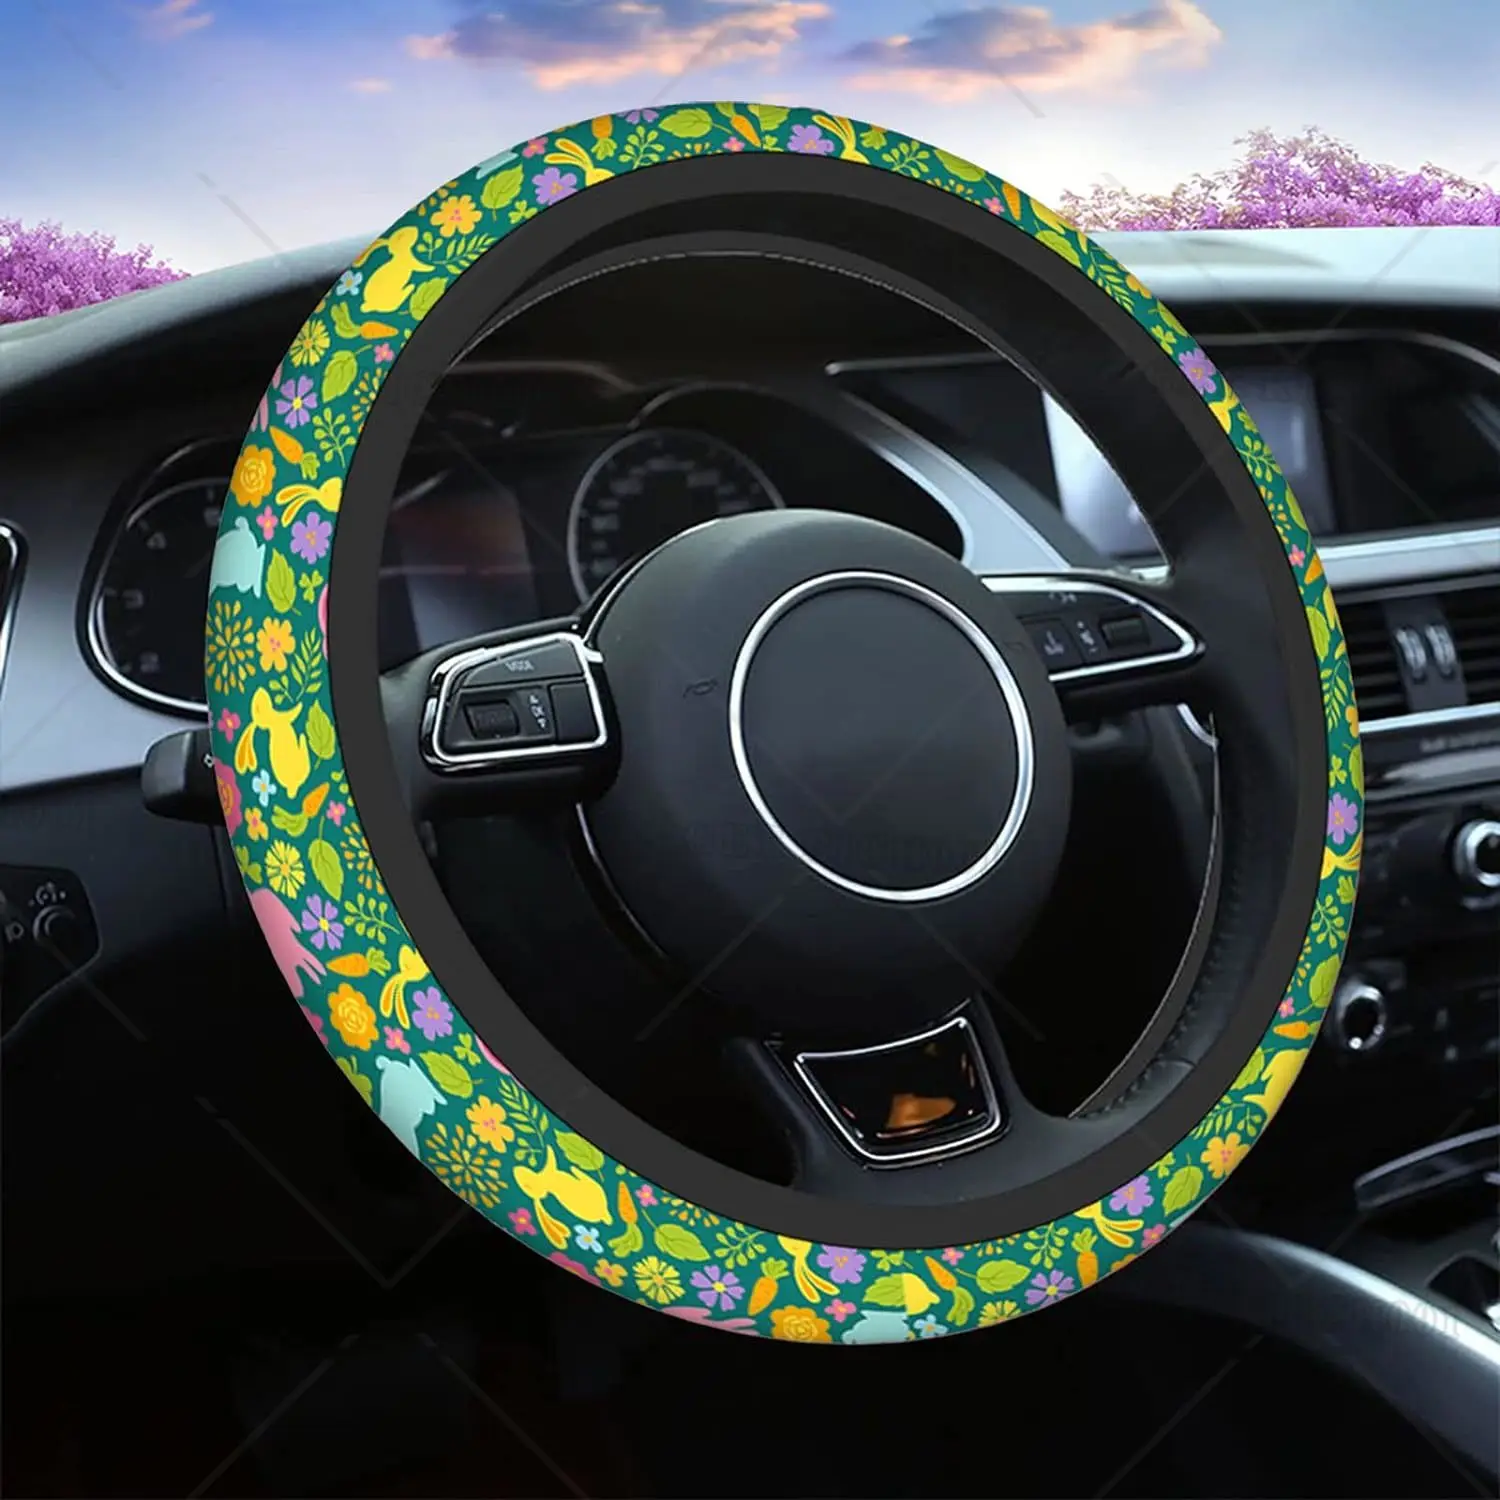 

Easter Steering Wheel Cover Colorful Bunnies Carrots Flowers Leaves Car Wheel Wrap Compatible with Most Auto Cars Trucks 15 Inch